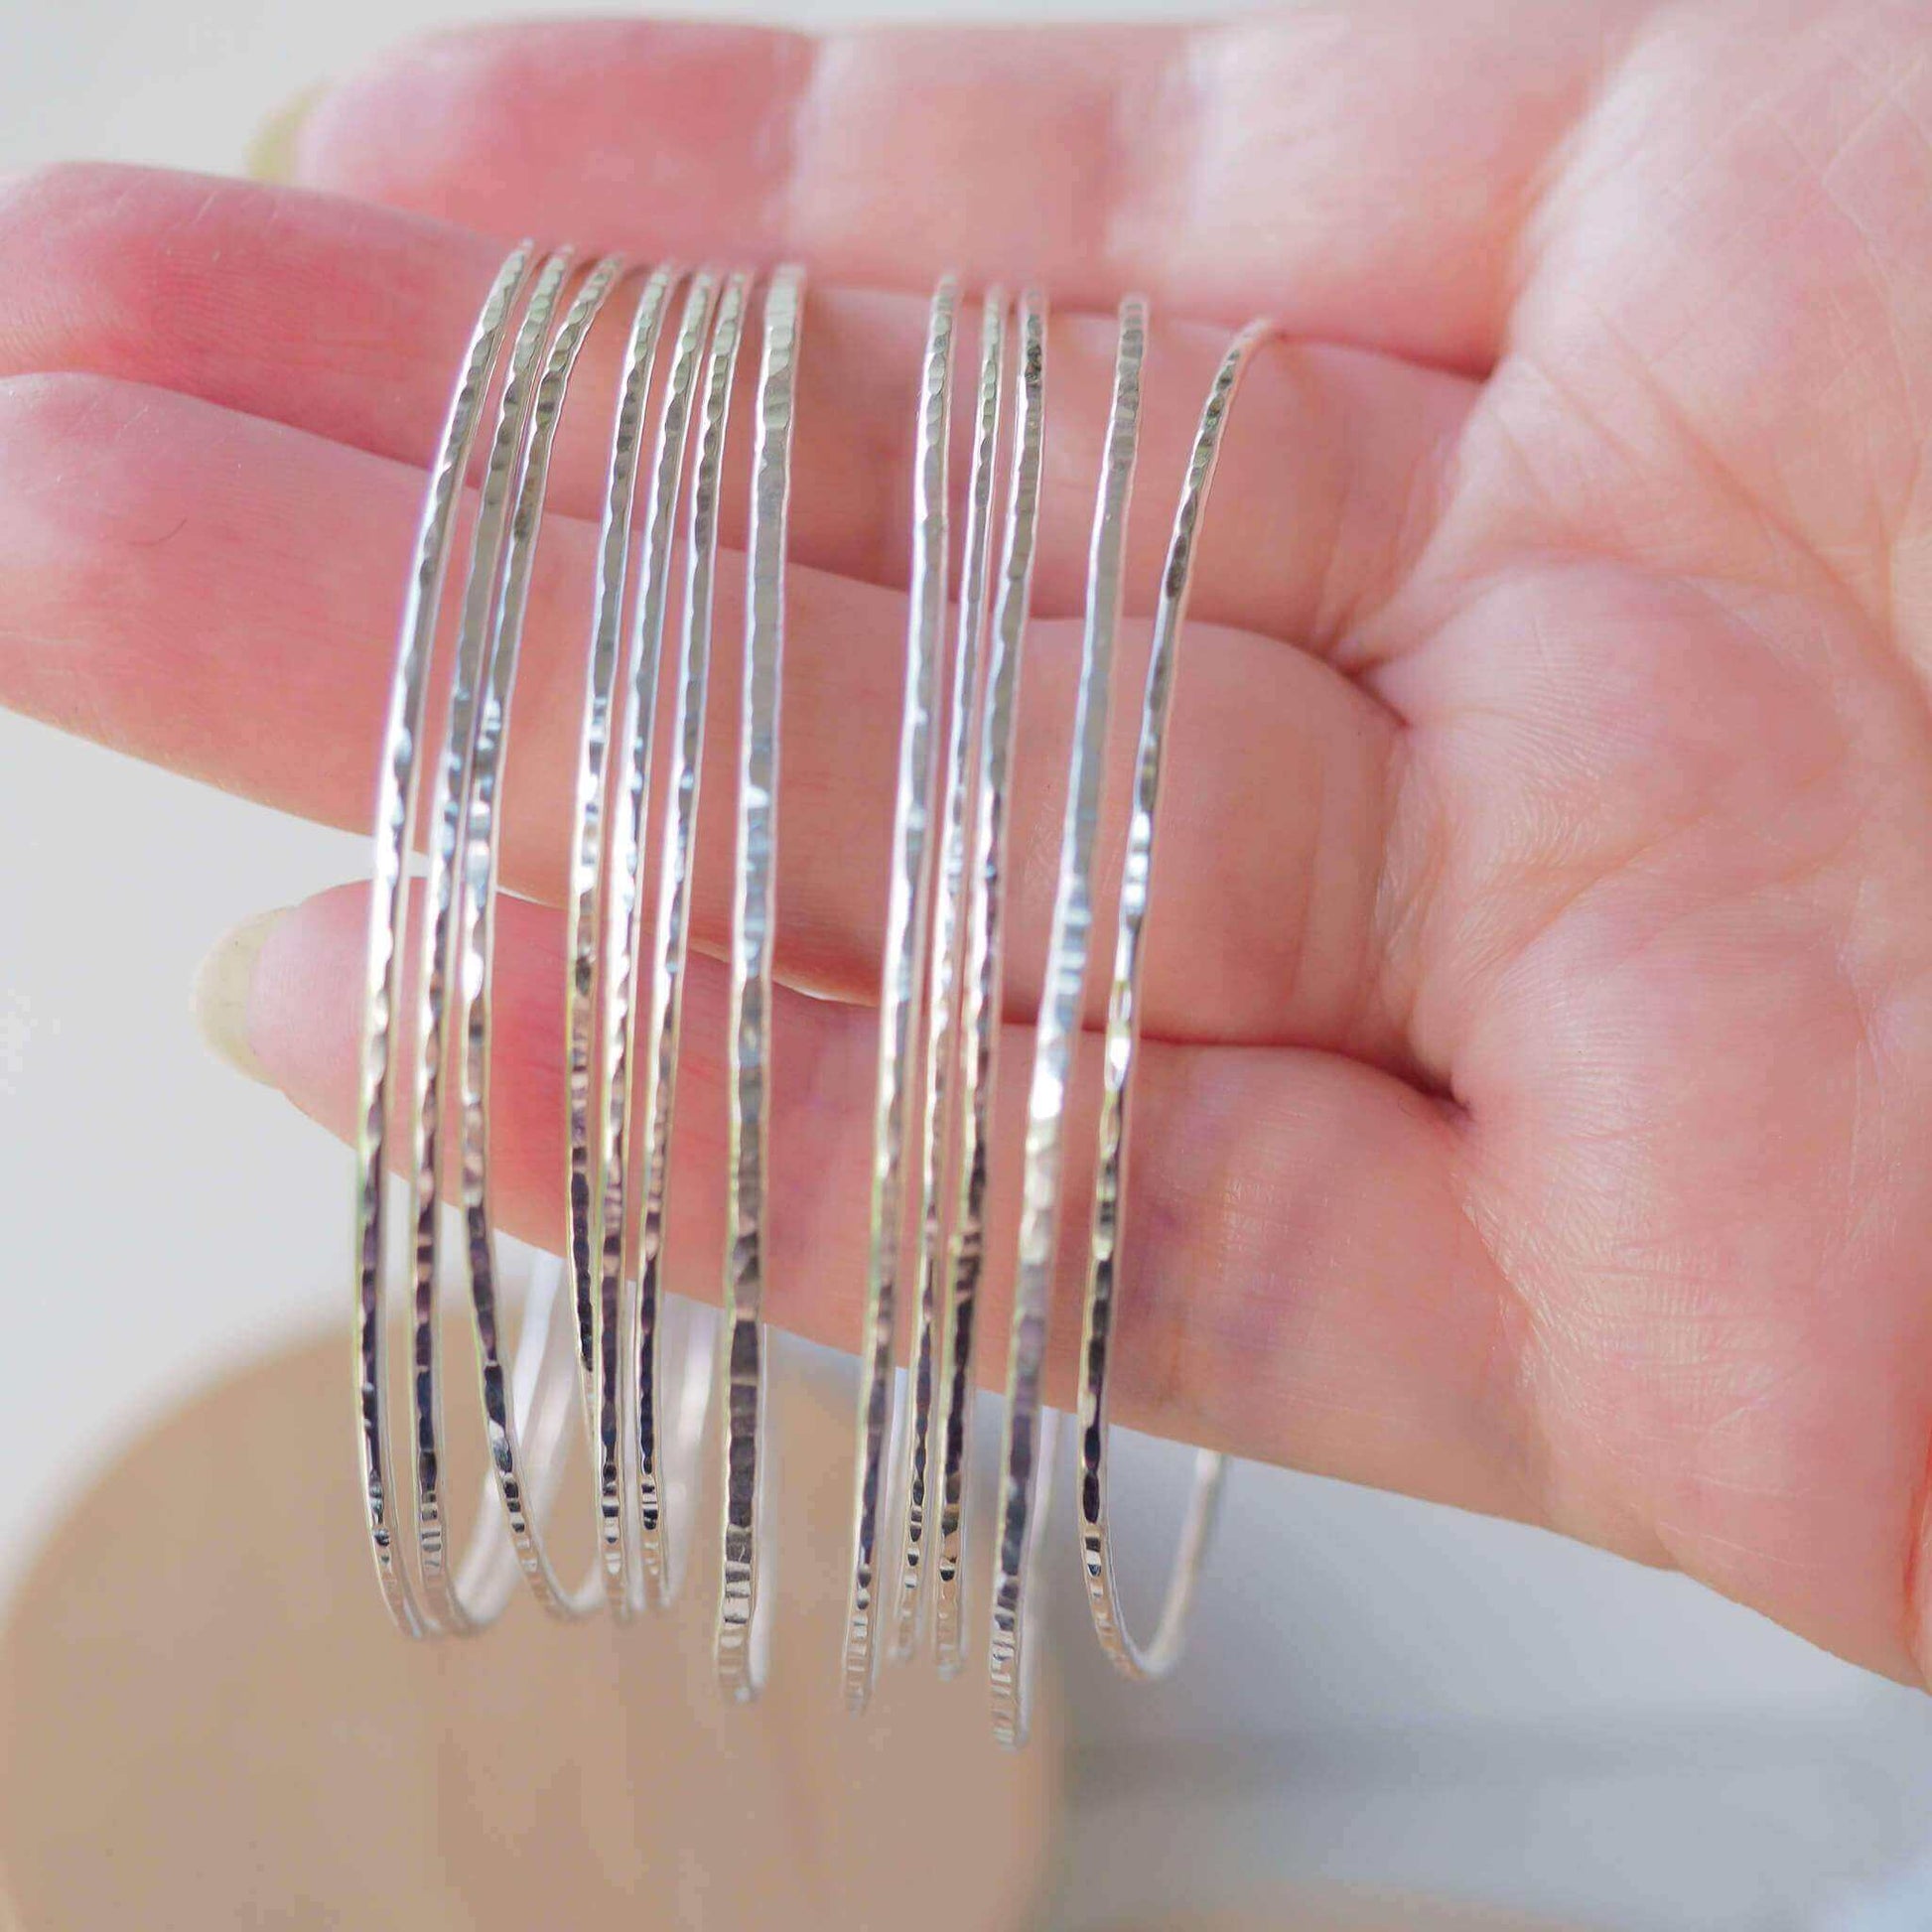 Stack of Sterling Silver Thin Bangles held in hand to show size and hammered texture. Super thin designed for stacking, perfect boho hippy style bangles. Handmade in the UK by Maram Jewellery